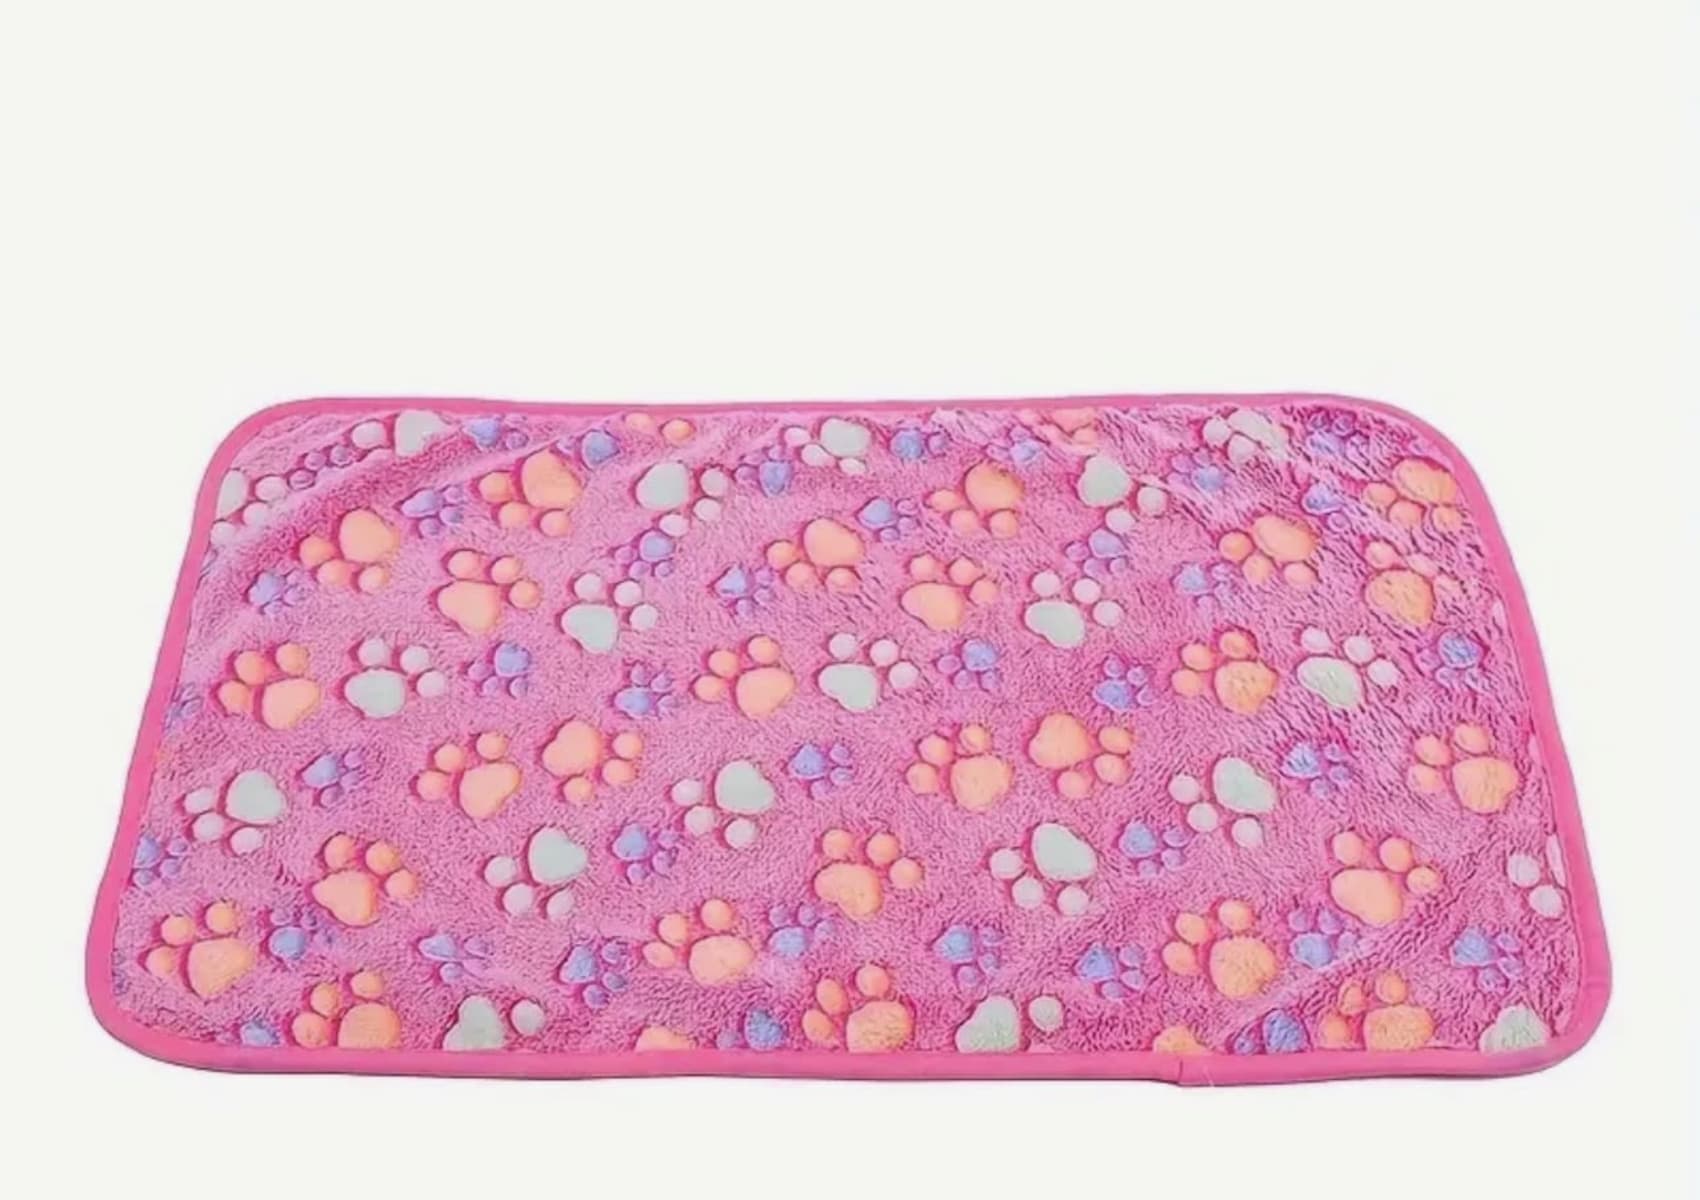 Soft snuggly pink paw print pattern blanket for your cat or dog